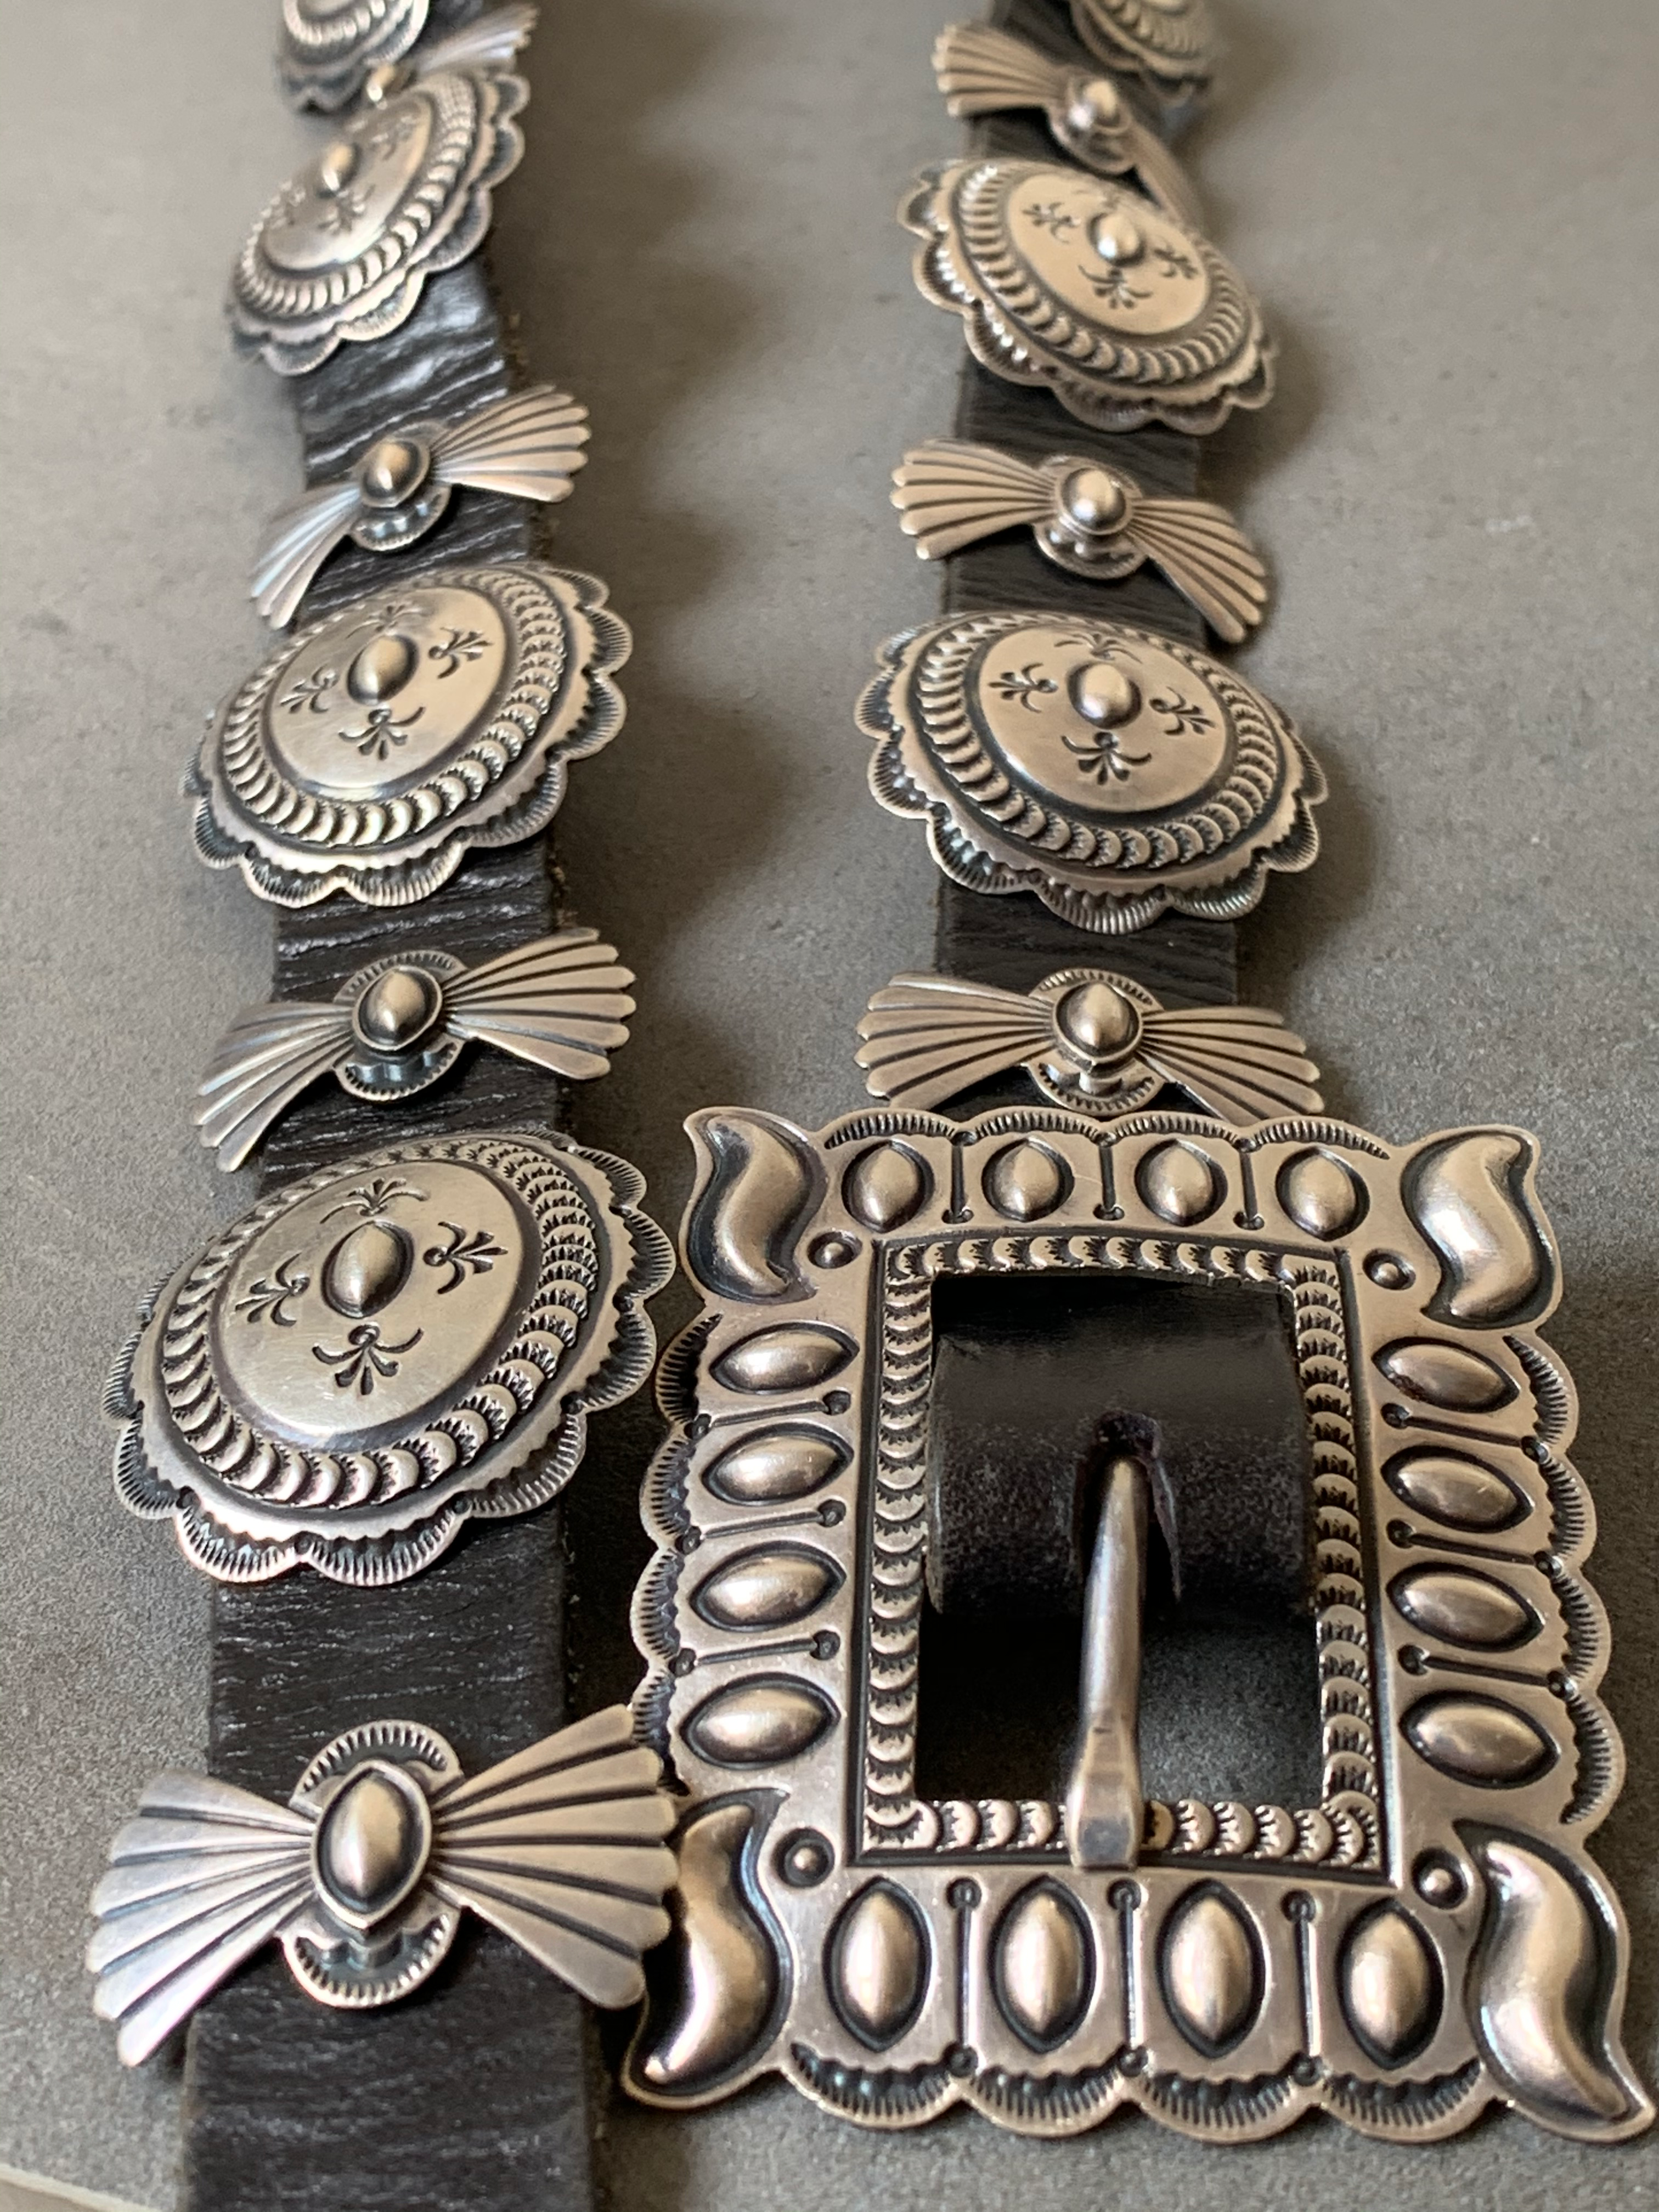 Gary Reeves Navajo Sterling Silver Concho Belt